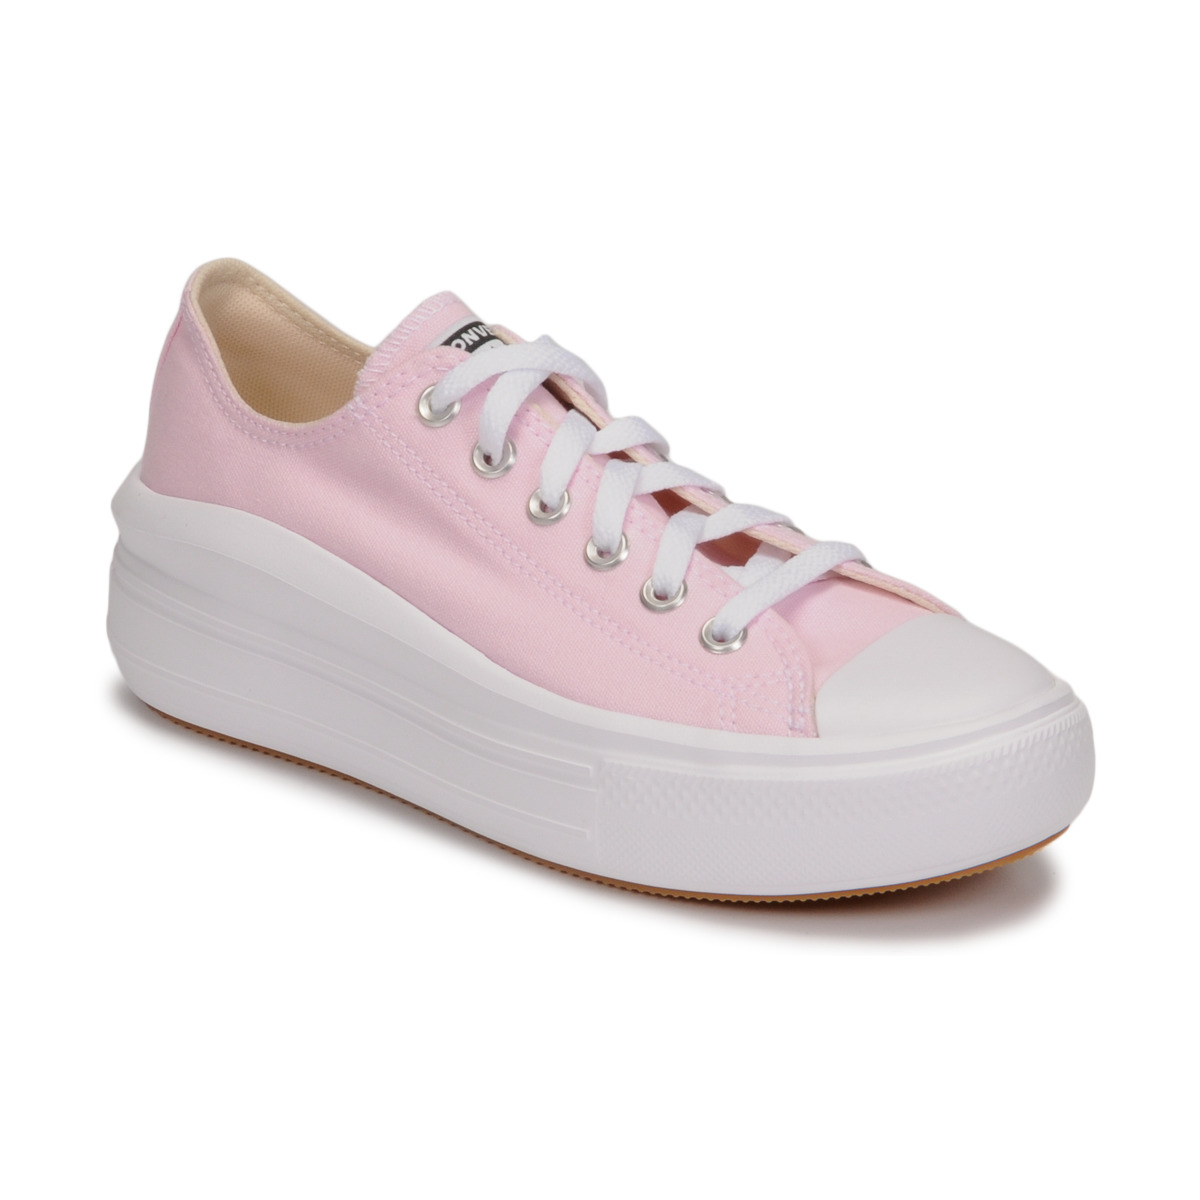 Shoes Women Low top trainers Converse CHUCK TAYLOR ALL STAR MOVE SEASONAL COLOR OX Pink